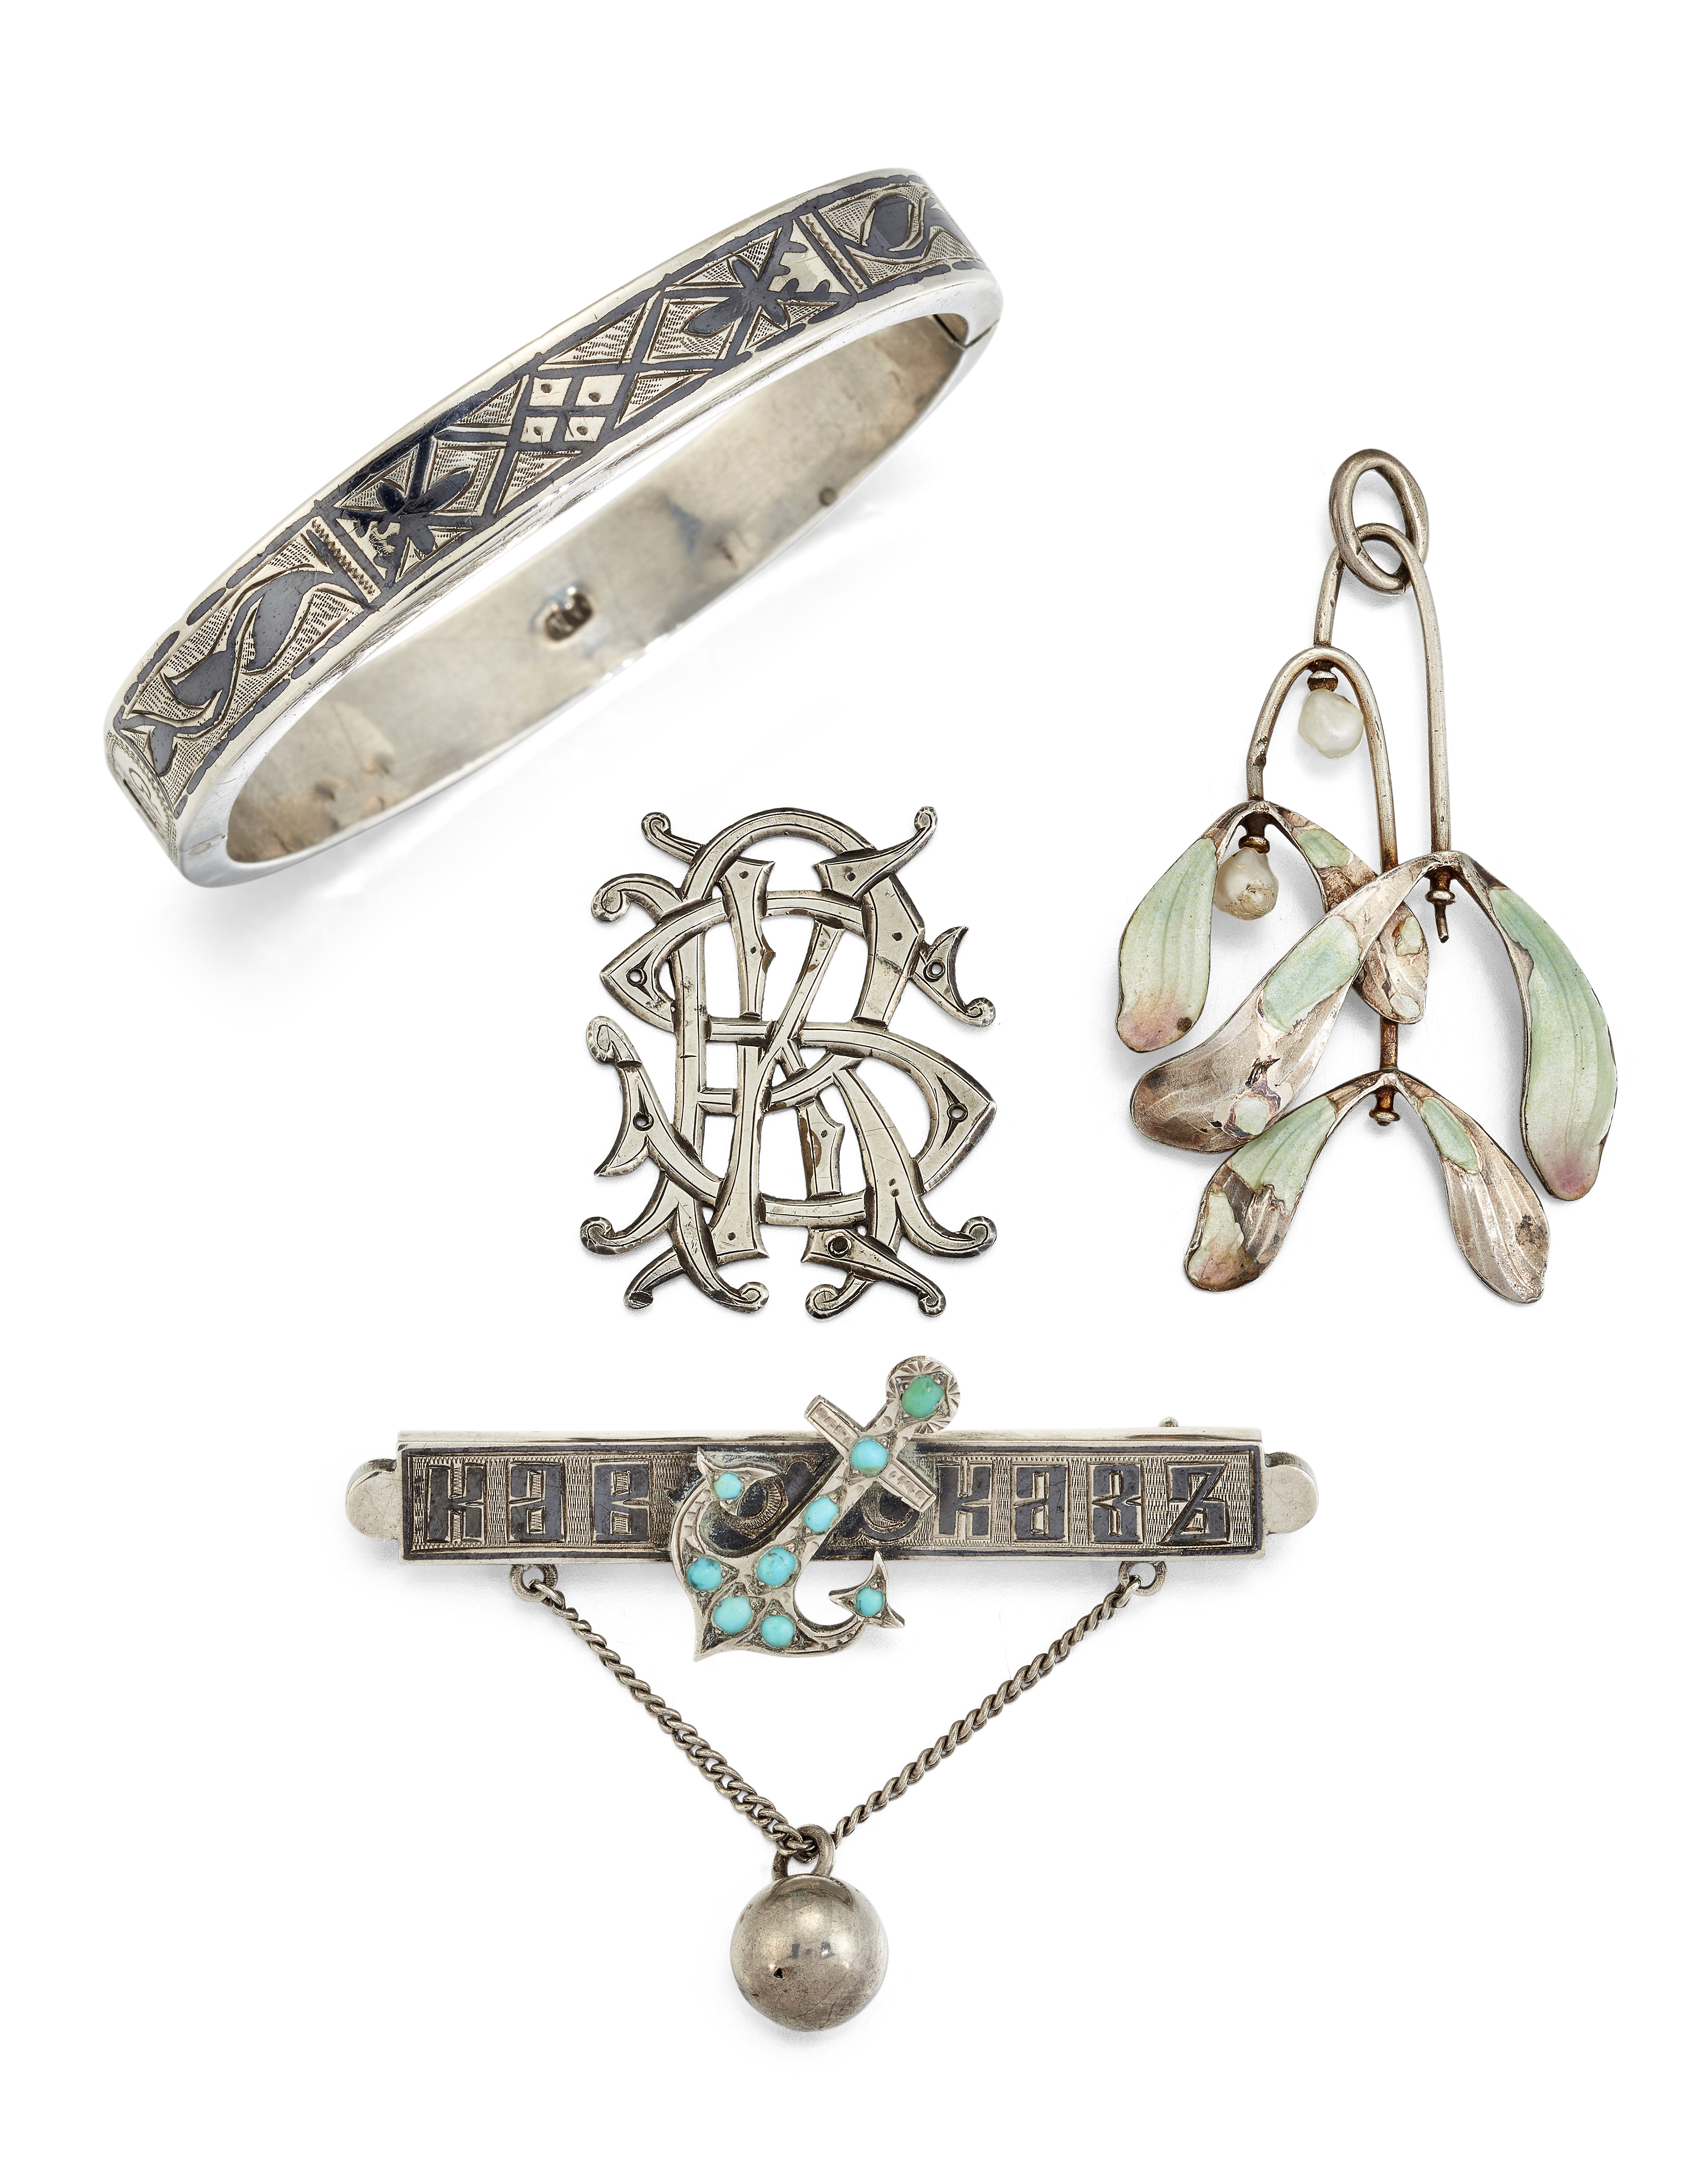 FOUR ITEMS OF SILVER JEWELLERY,